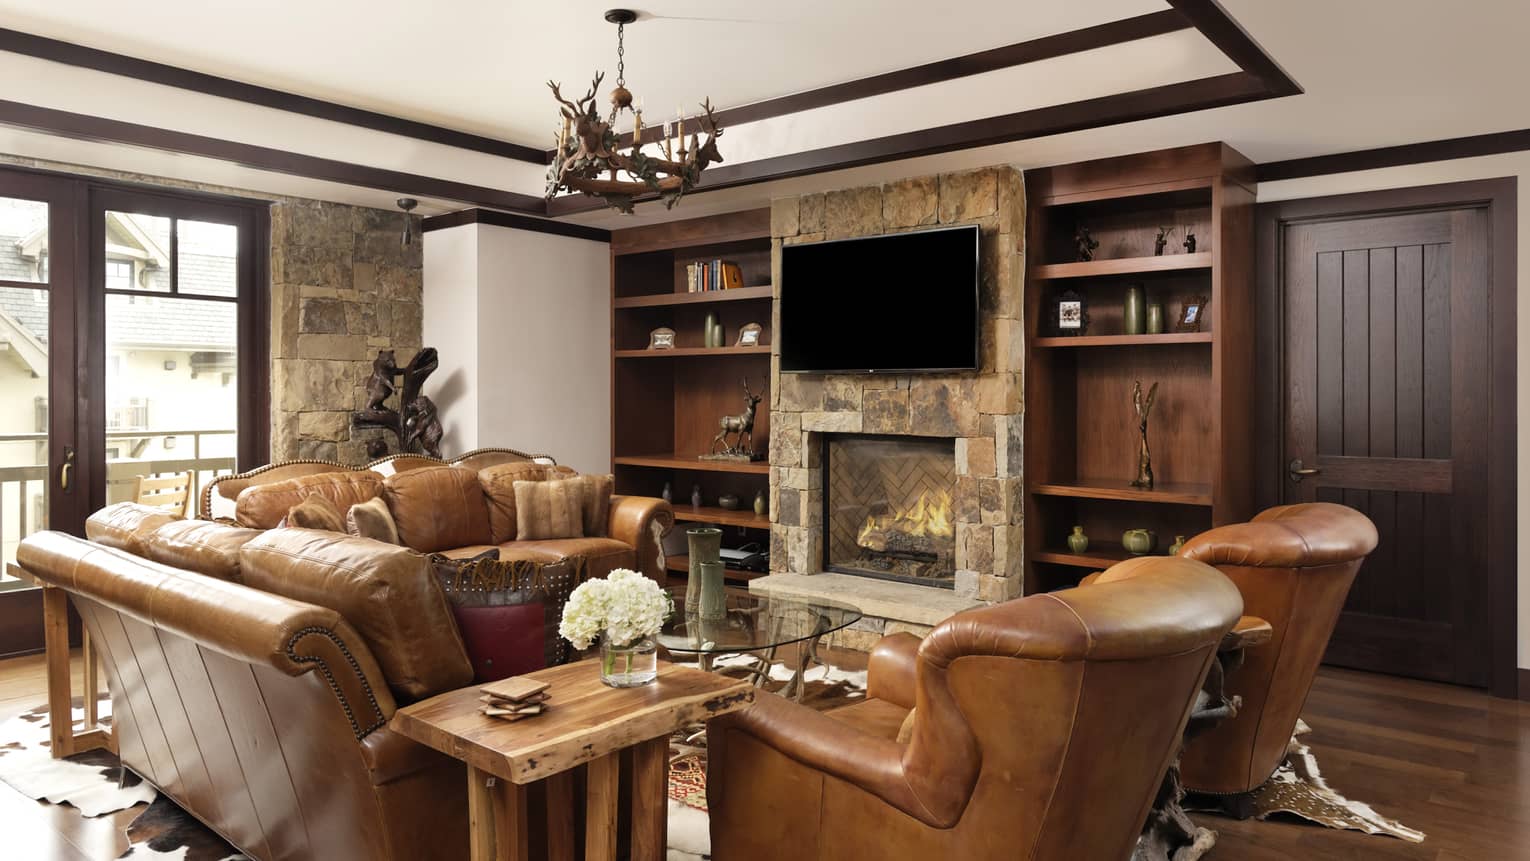 Mountain-chic living room with two brown leather sofas, two matching arm chairs, stonework fireplace